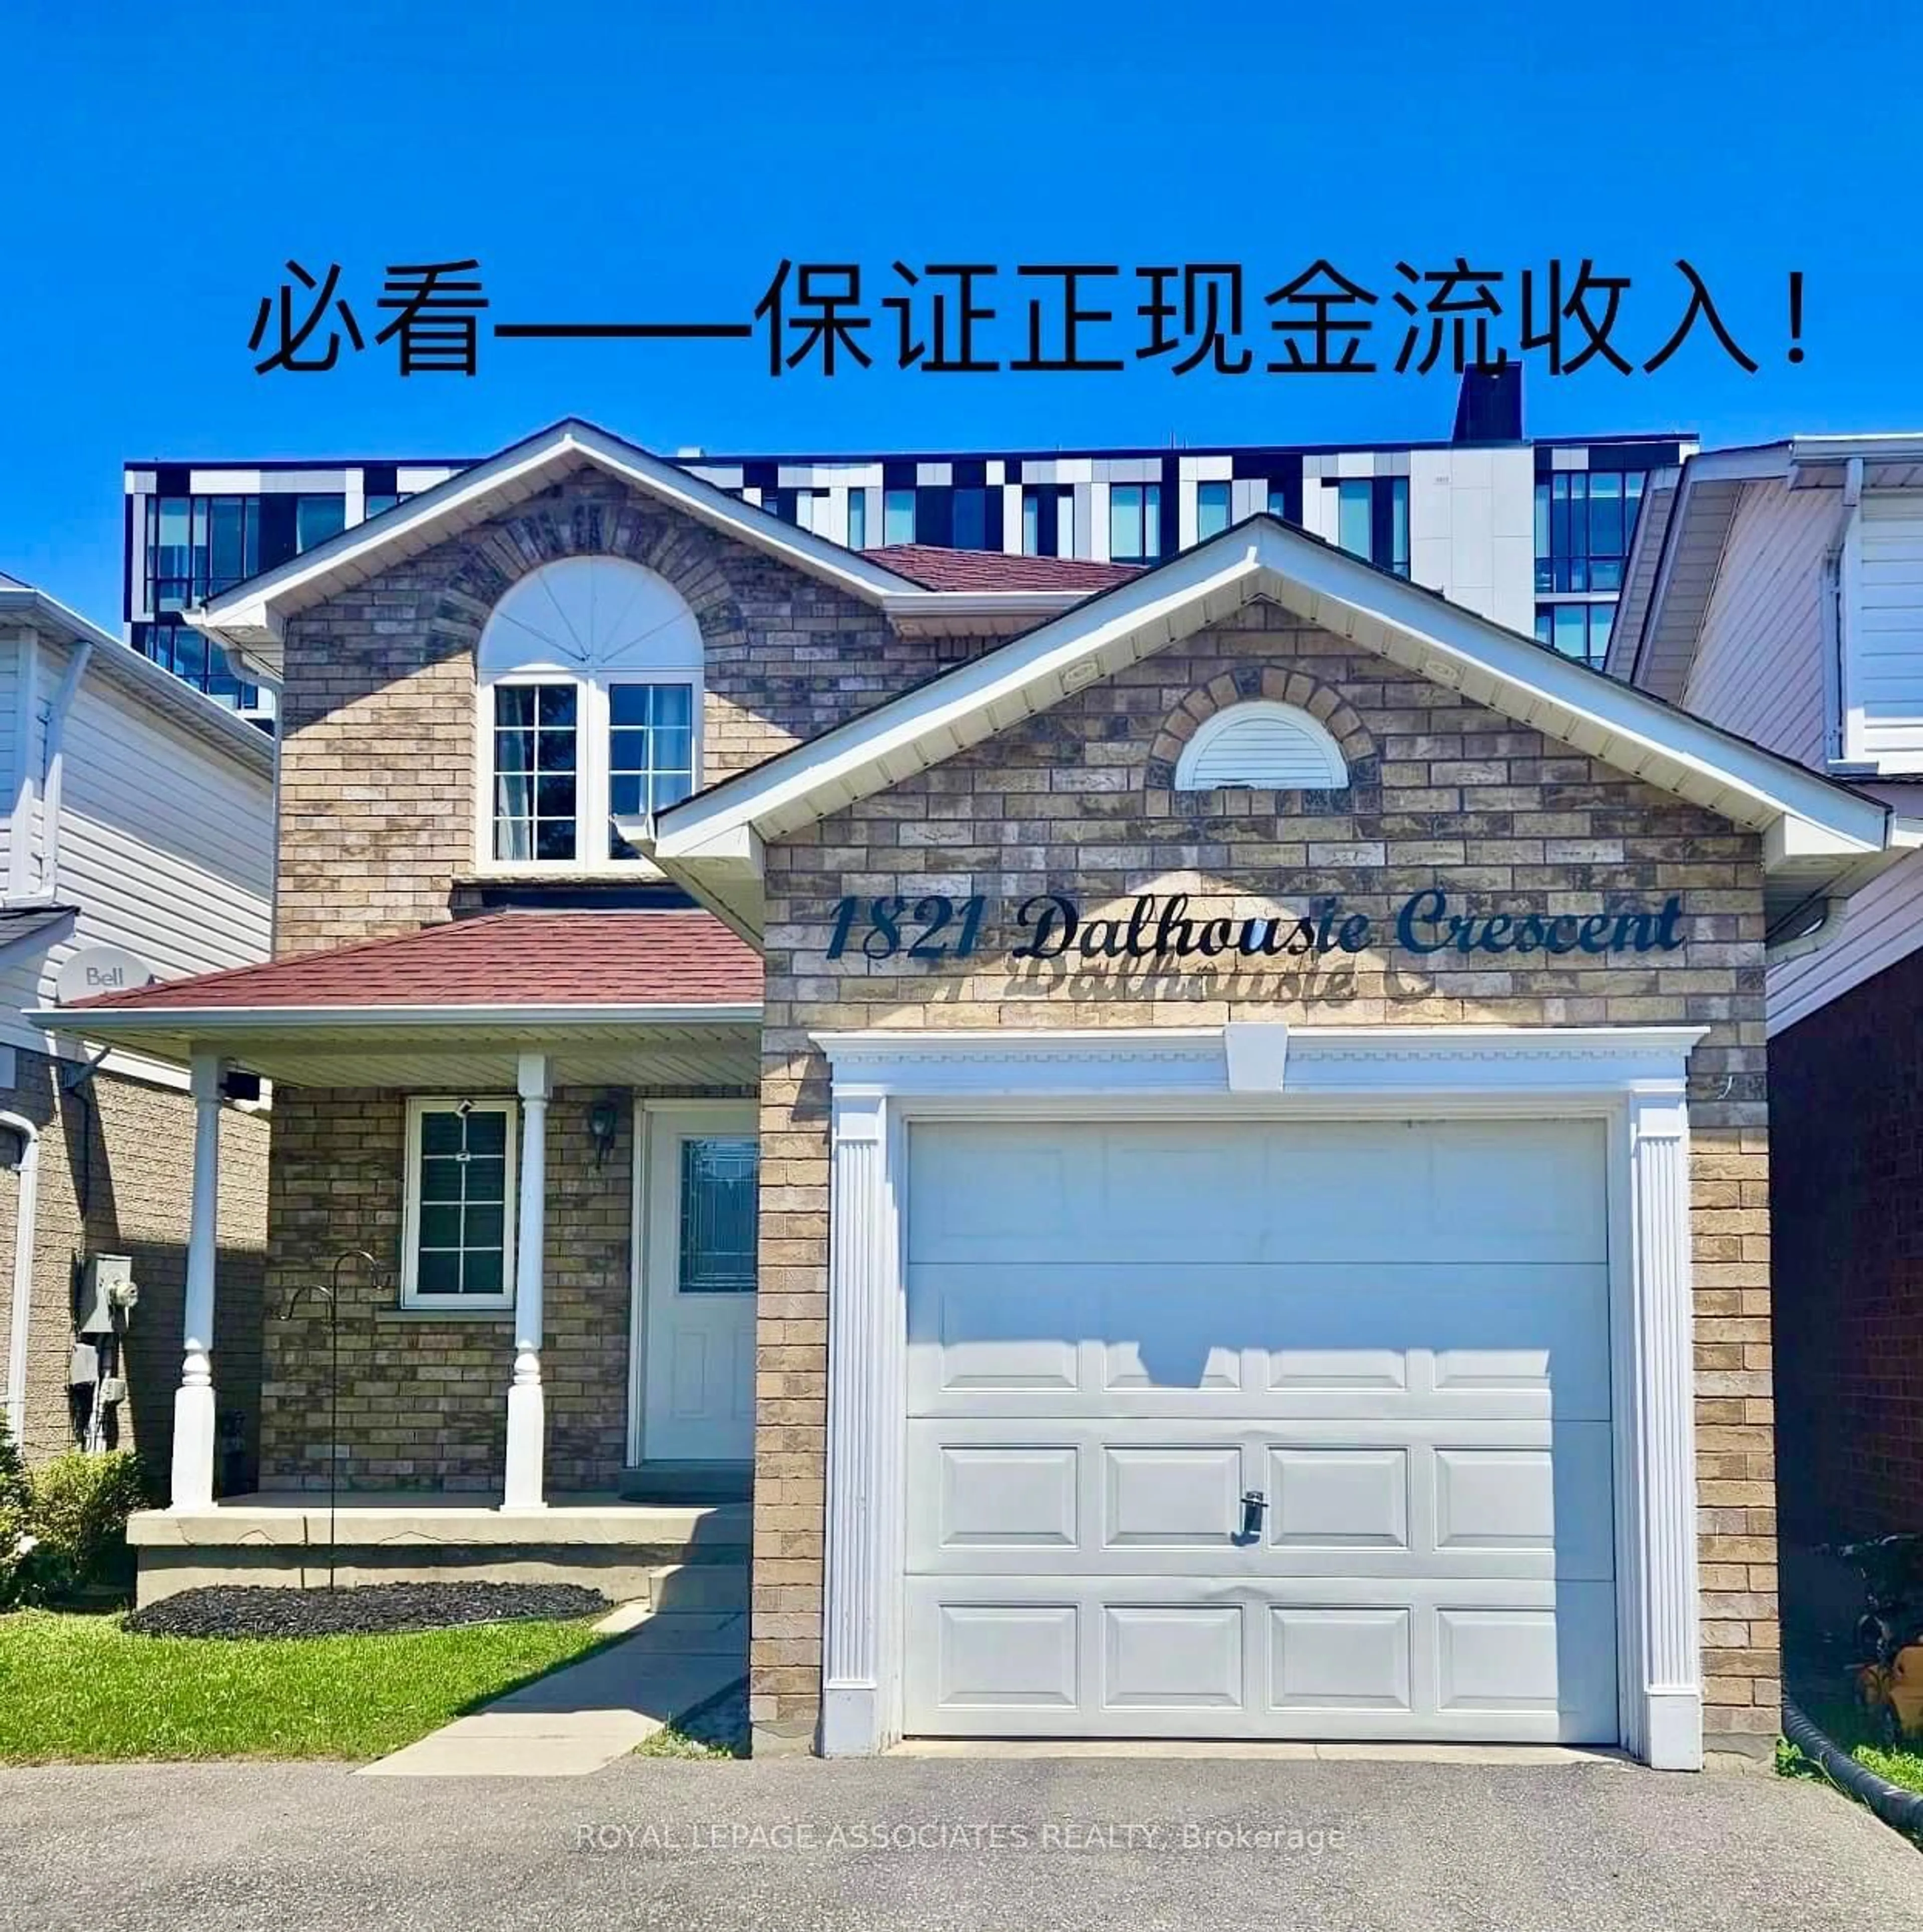 Home with brick exterior material for 1821 Dalhousie Cres, Oshawa Ontario L1G 8C5